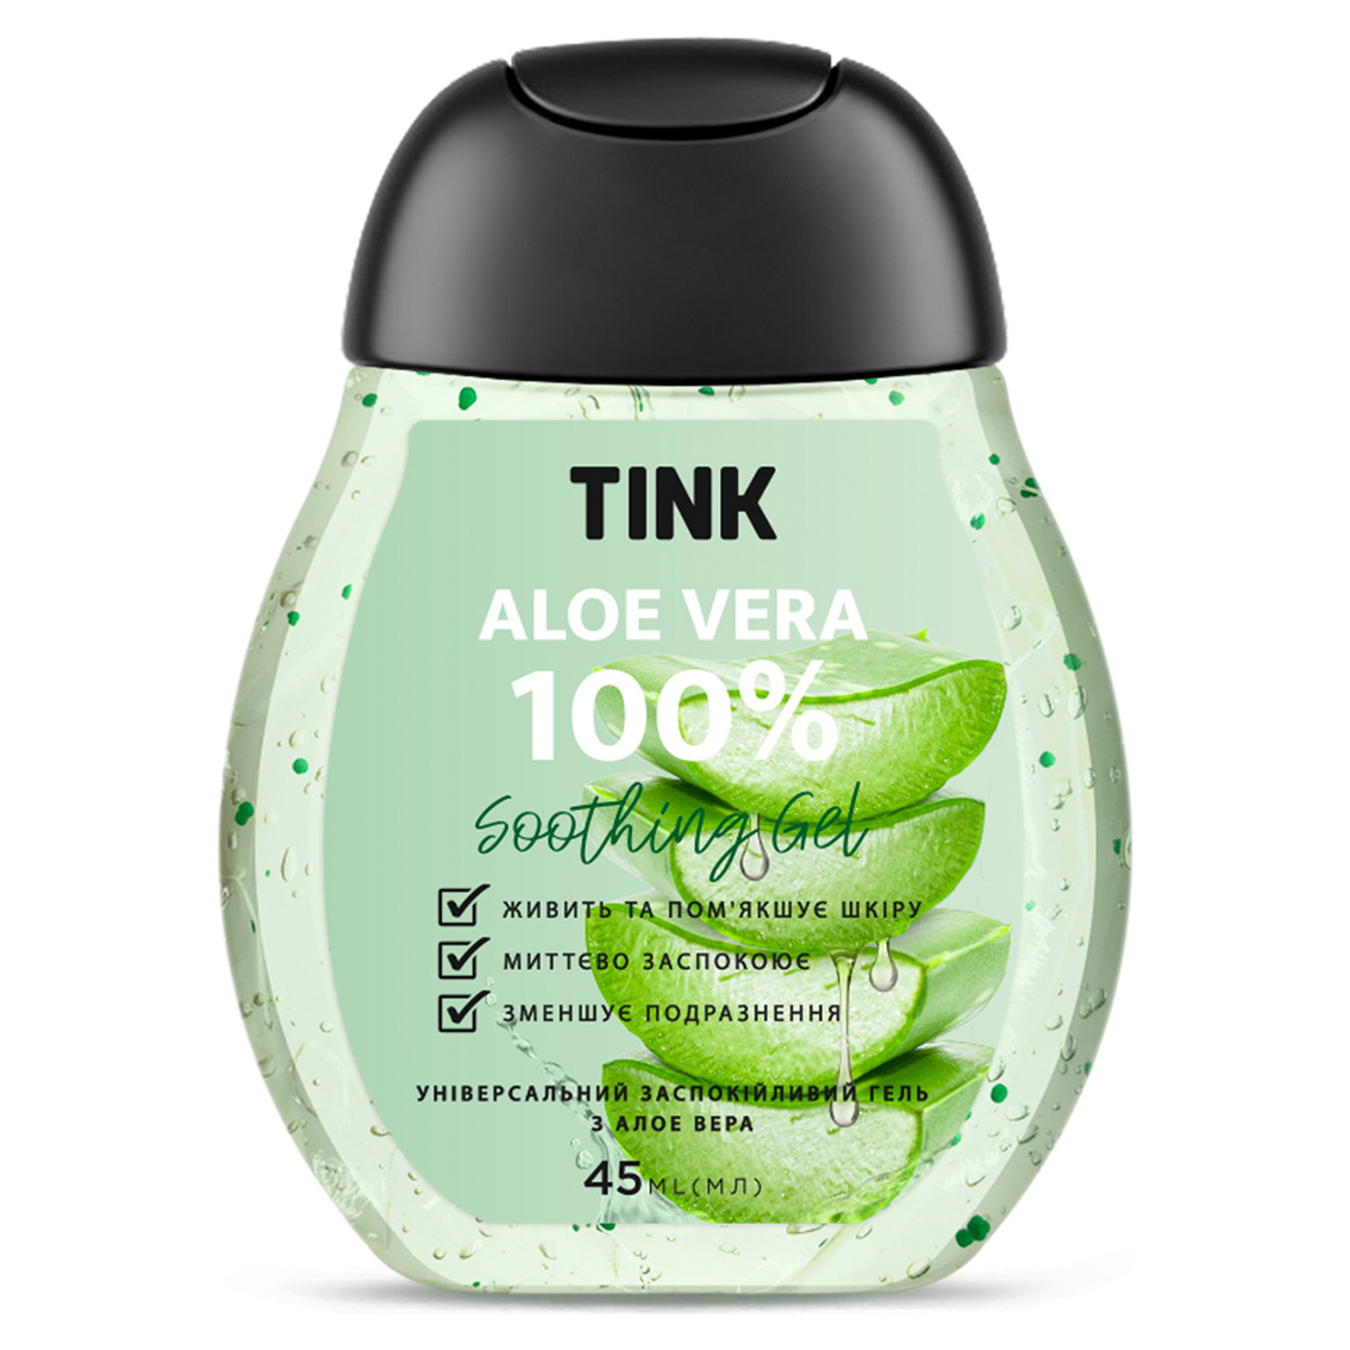 Tink soothing face and body gel with aloe 45ml